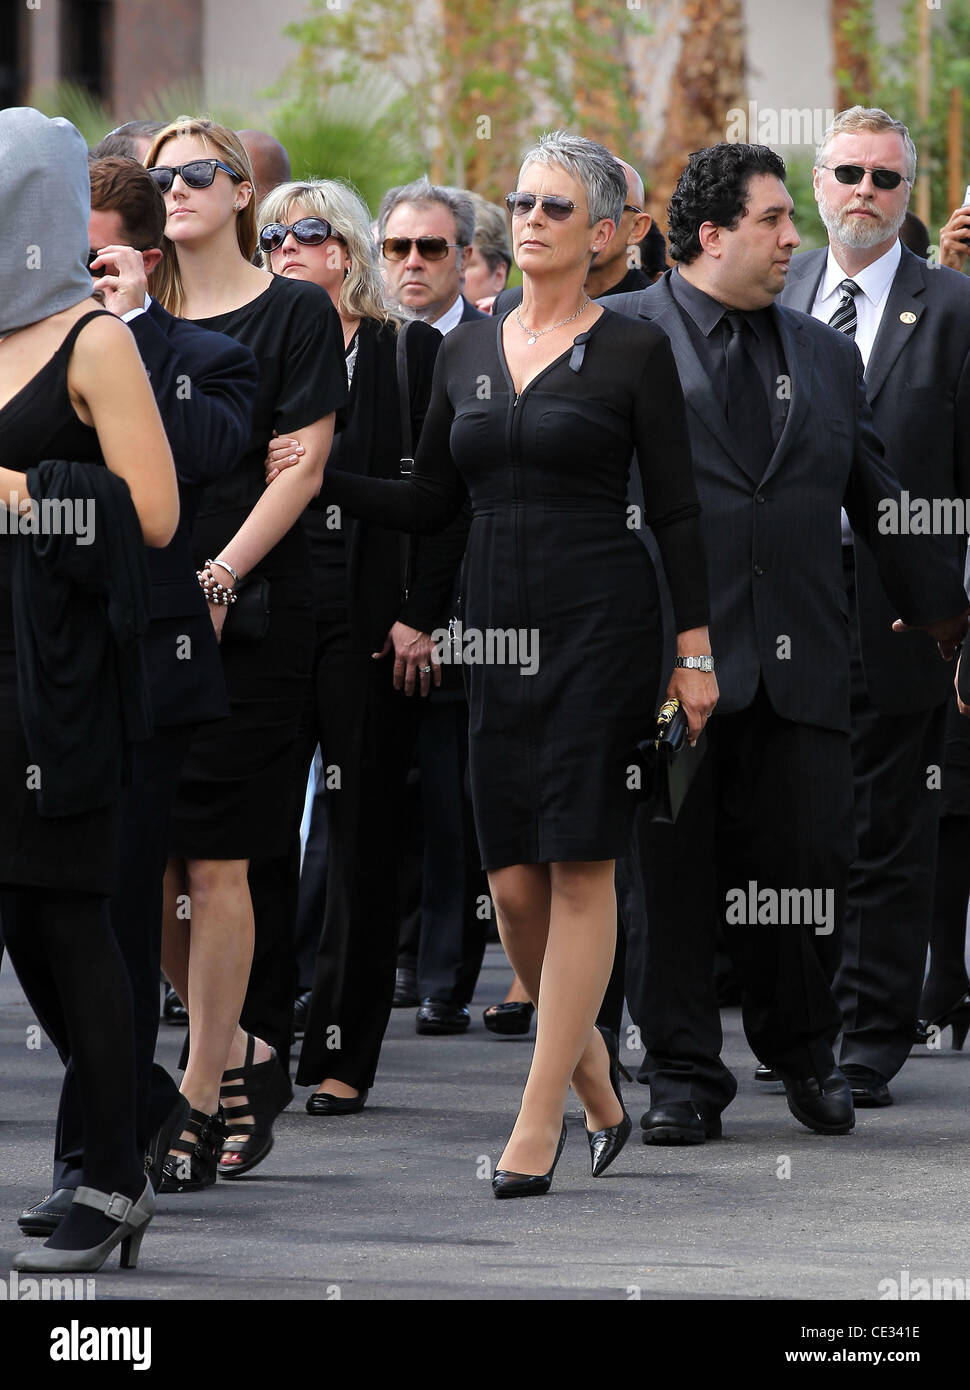 Jamie Lee Curtis attend the funeral for Curtis' father, actor Tony Curtis,  at the Palm Mortuary & Cemetery. Curtis died on September 29 at age 85  Henderson, Nevada  Stock Photo - Alamy